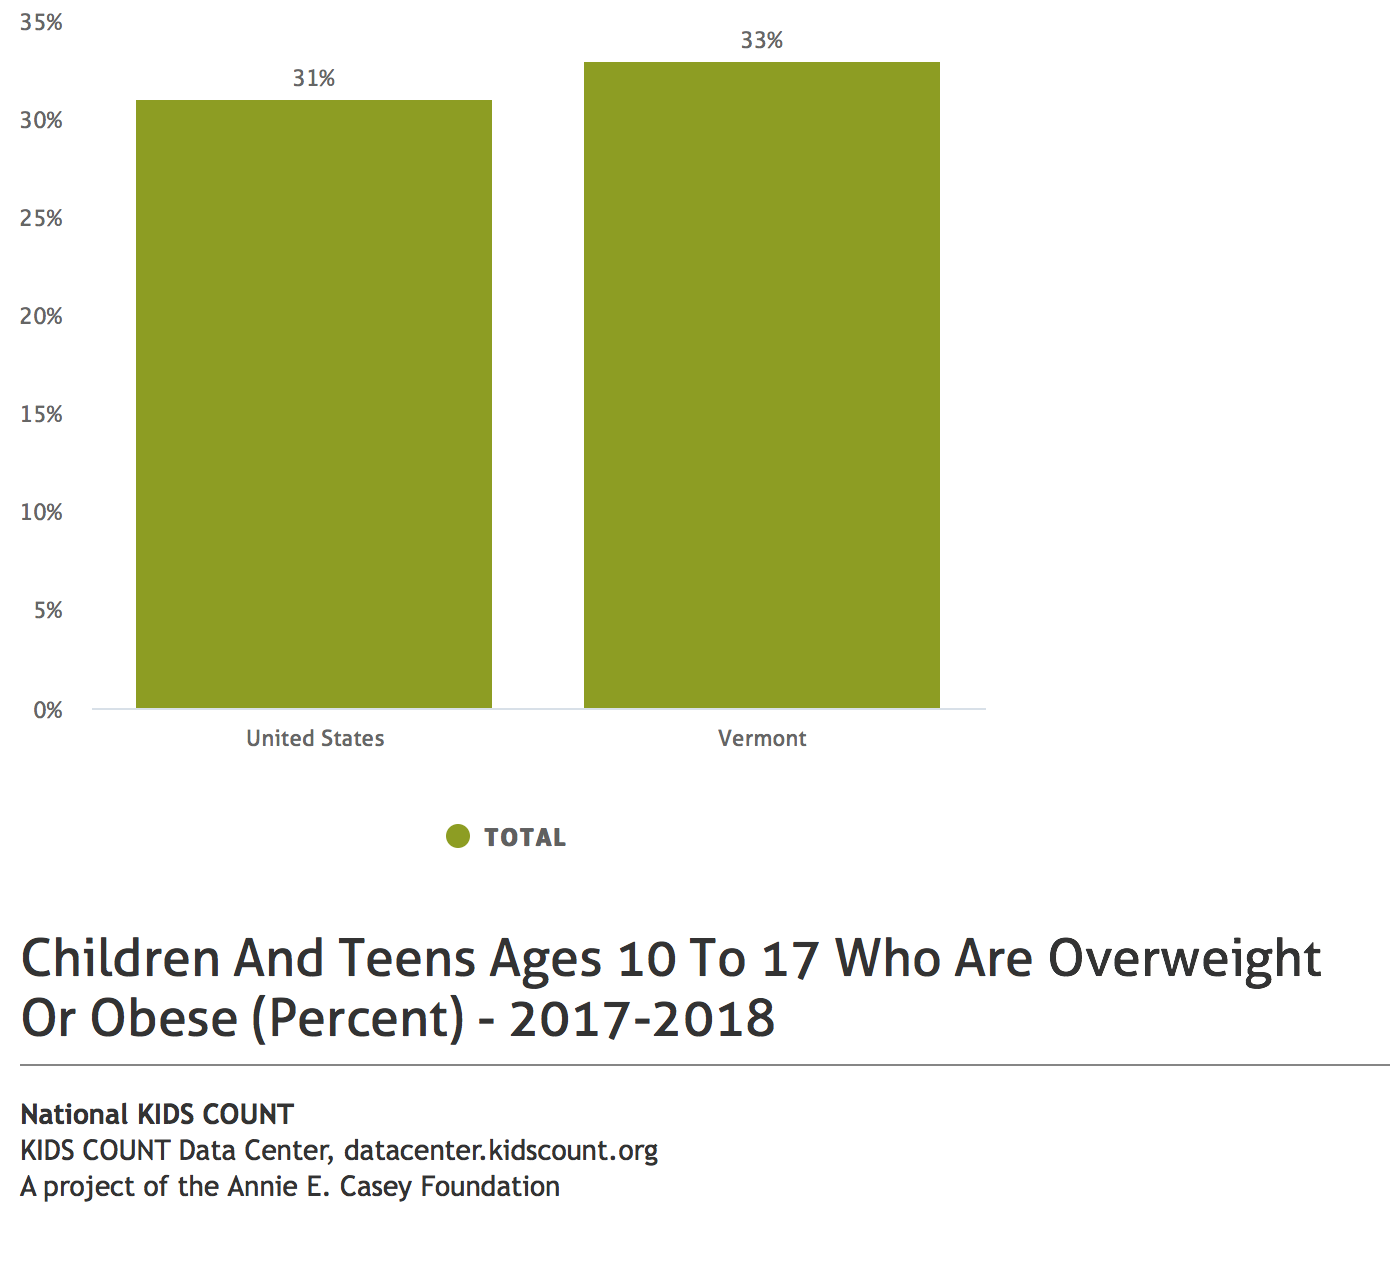 Children and teens (ages 10 to 17) who are overweight or obese